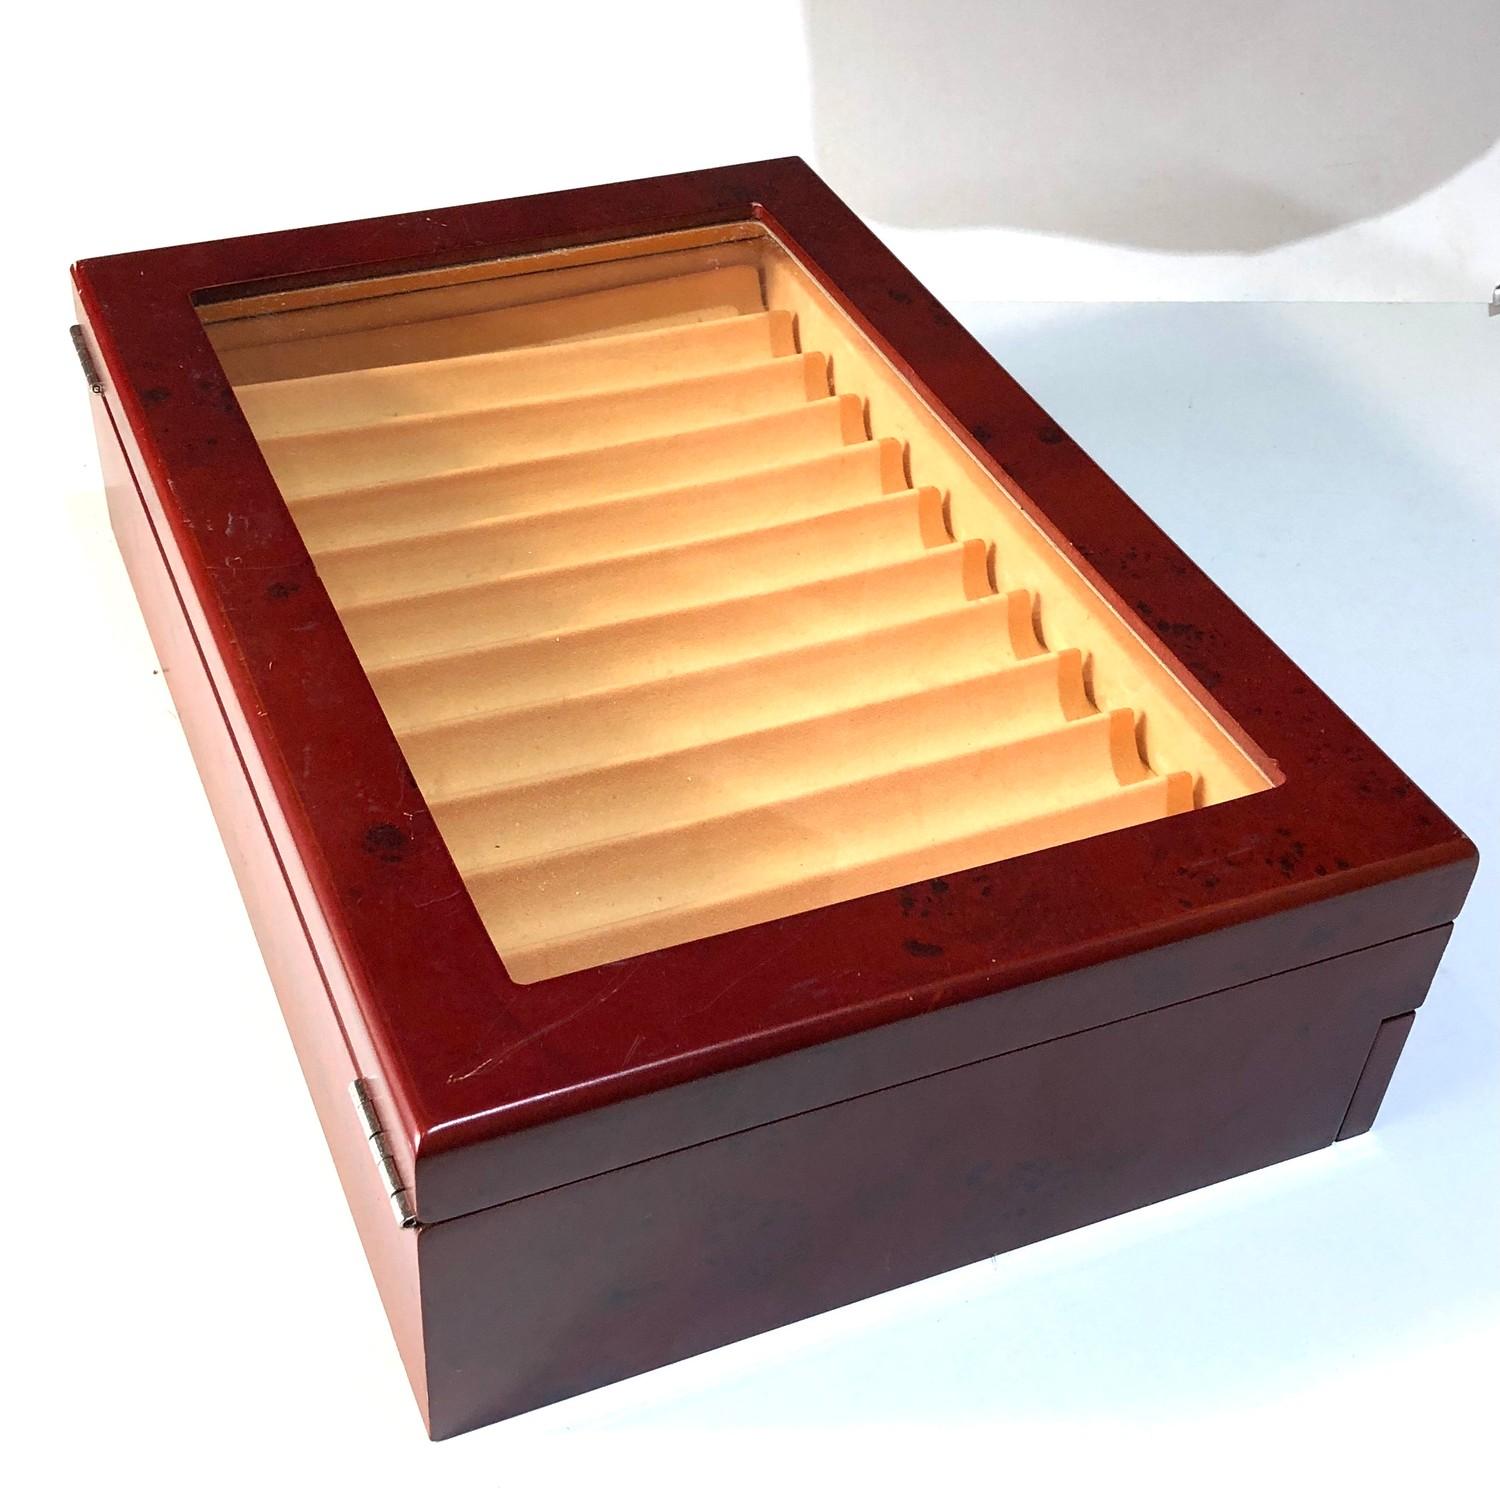 Pen display case for 24 pens measures approx 31cm by 21cm 9cm tall - Image 4 of 4